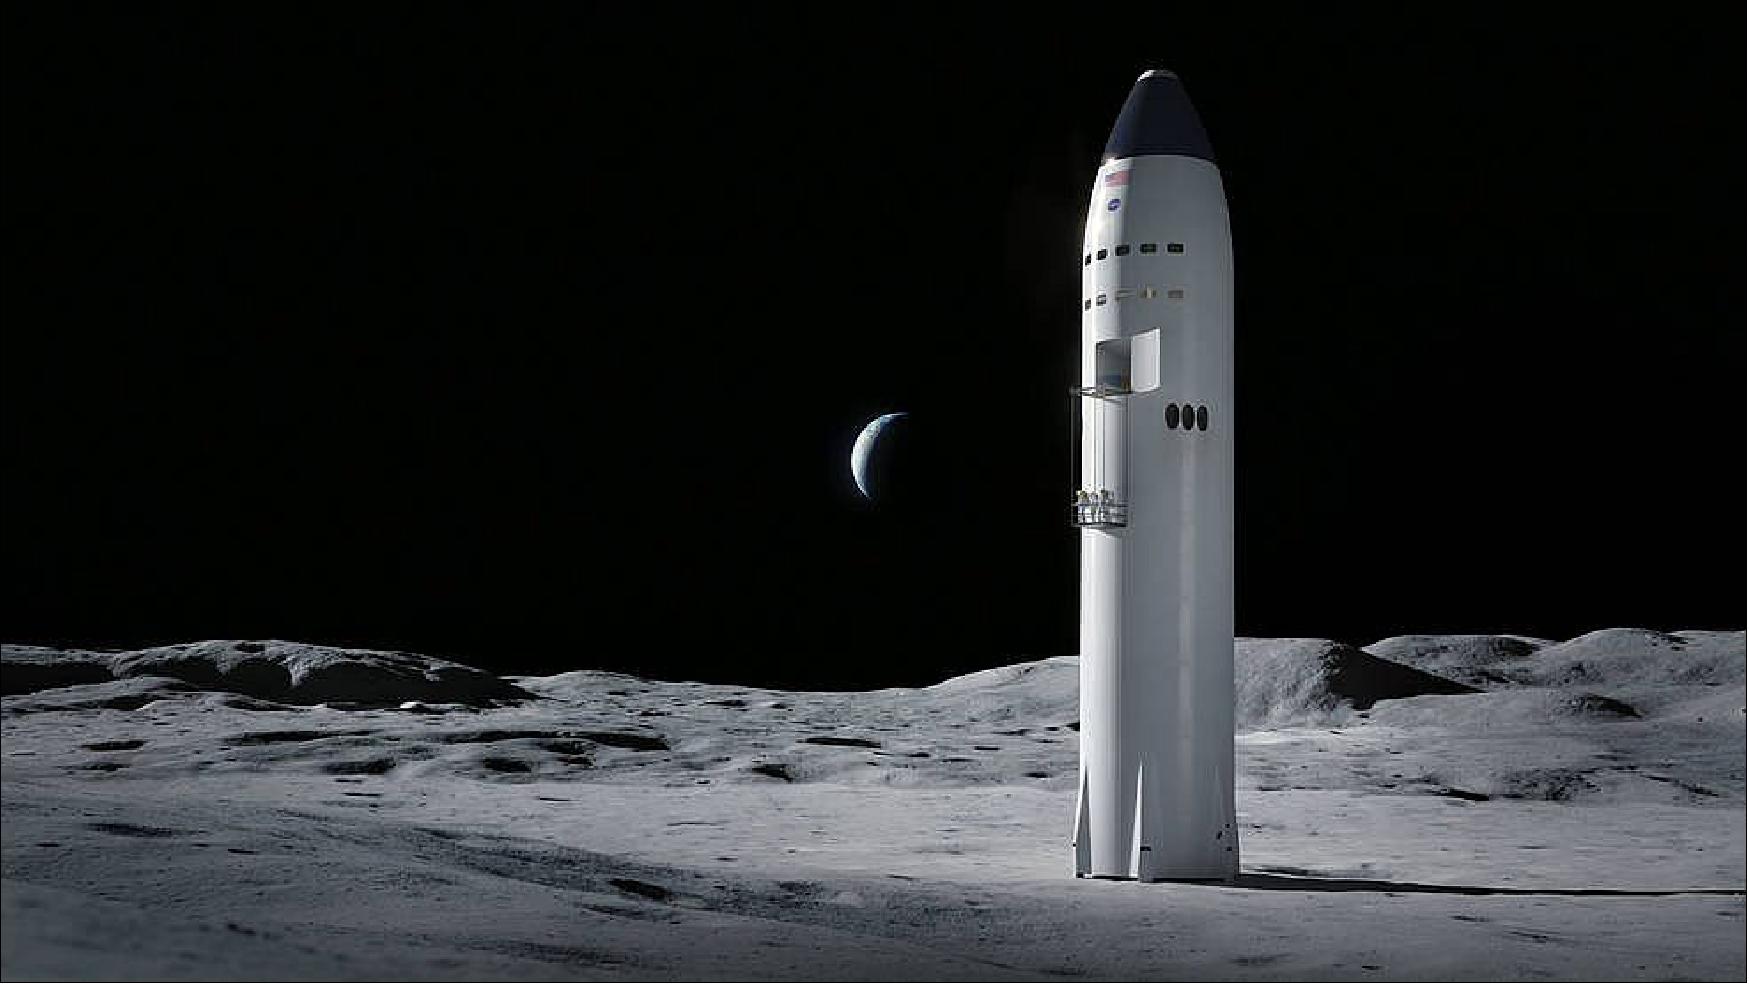 Figure 42: Artist concept of the SpaceX Starship on the surface of the Moon (image credit: SpaceX)